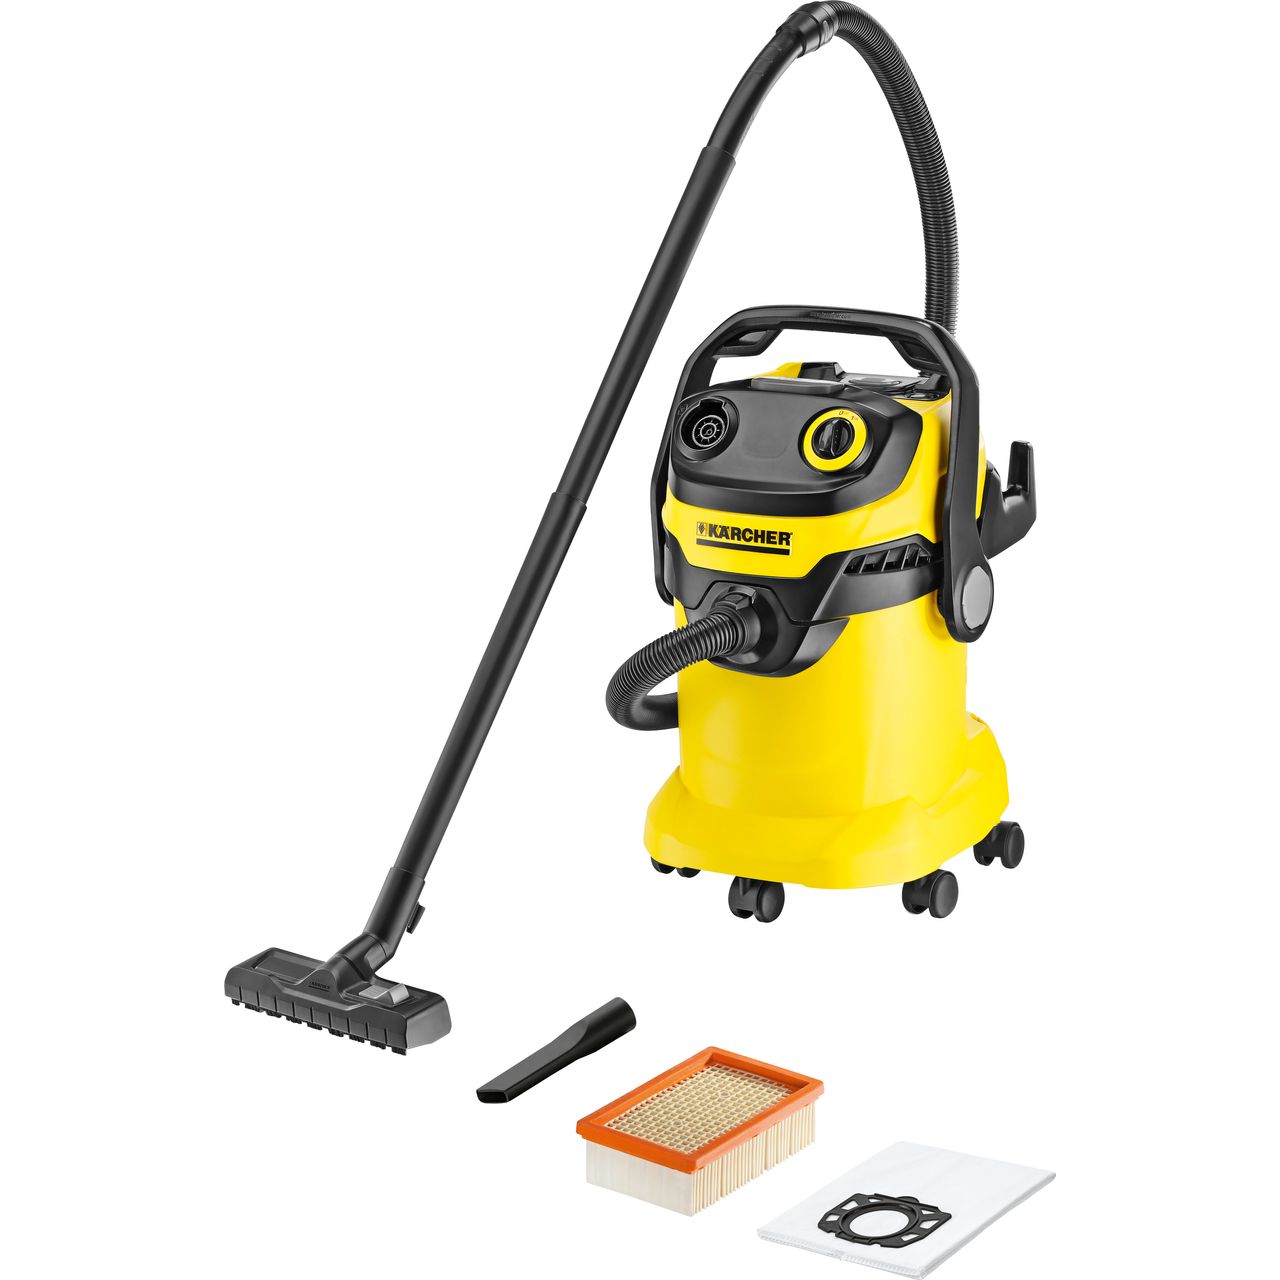 Karcher WD 5 Wet & Dry Cleaner Review